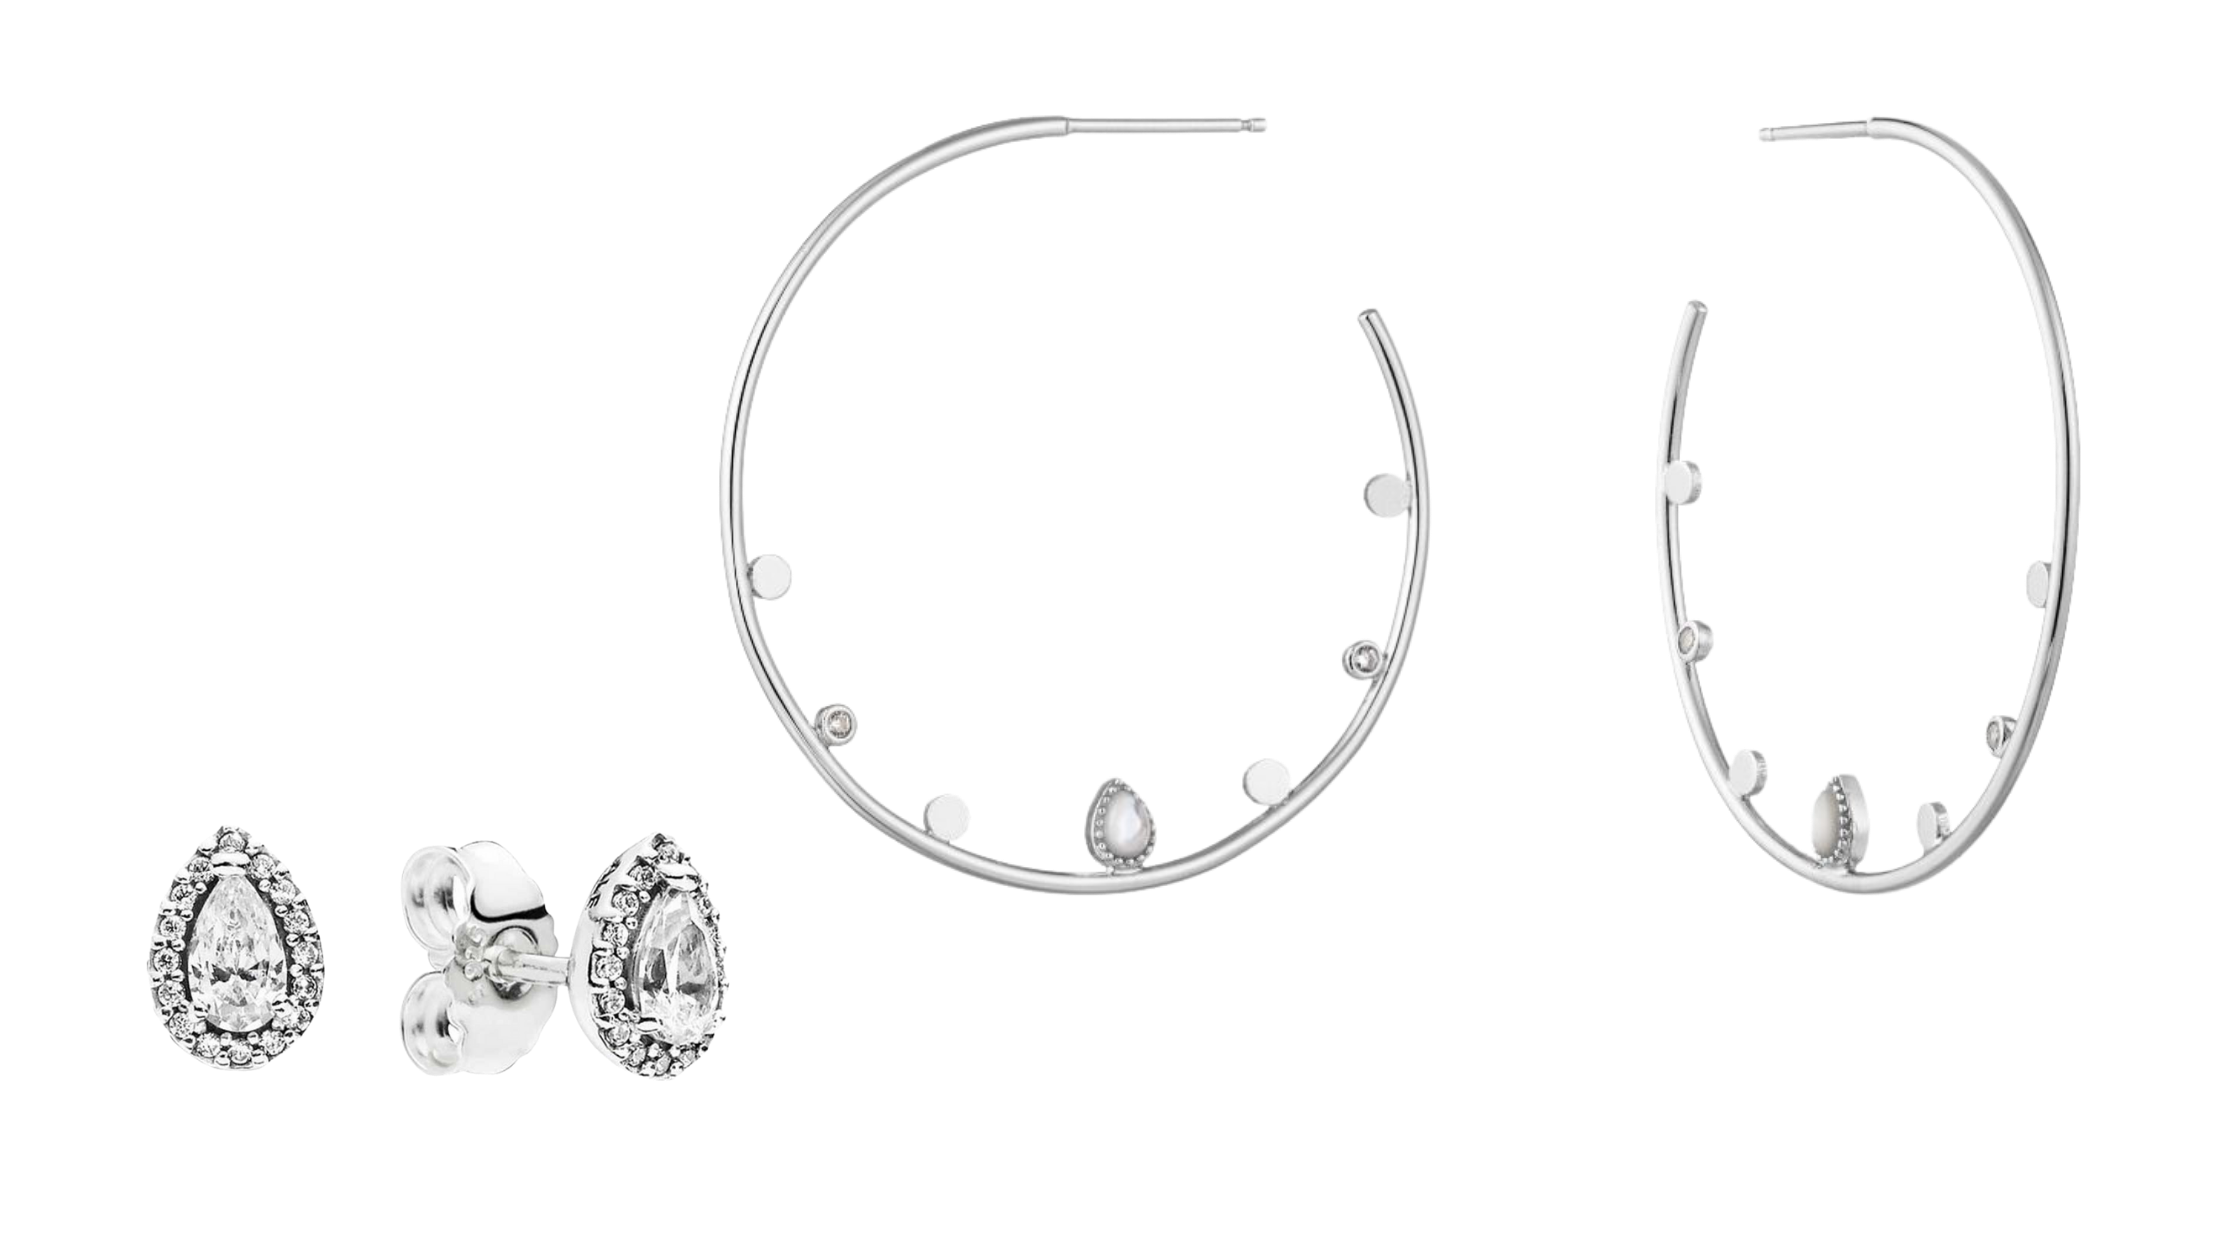 Mismatched earrings pairing